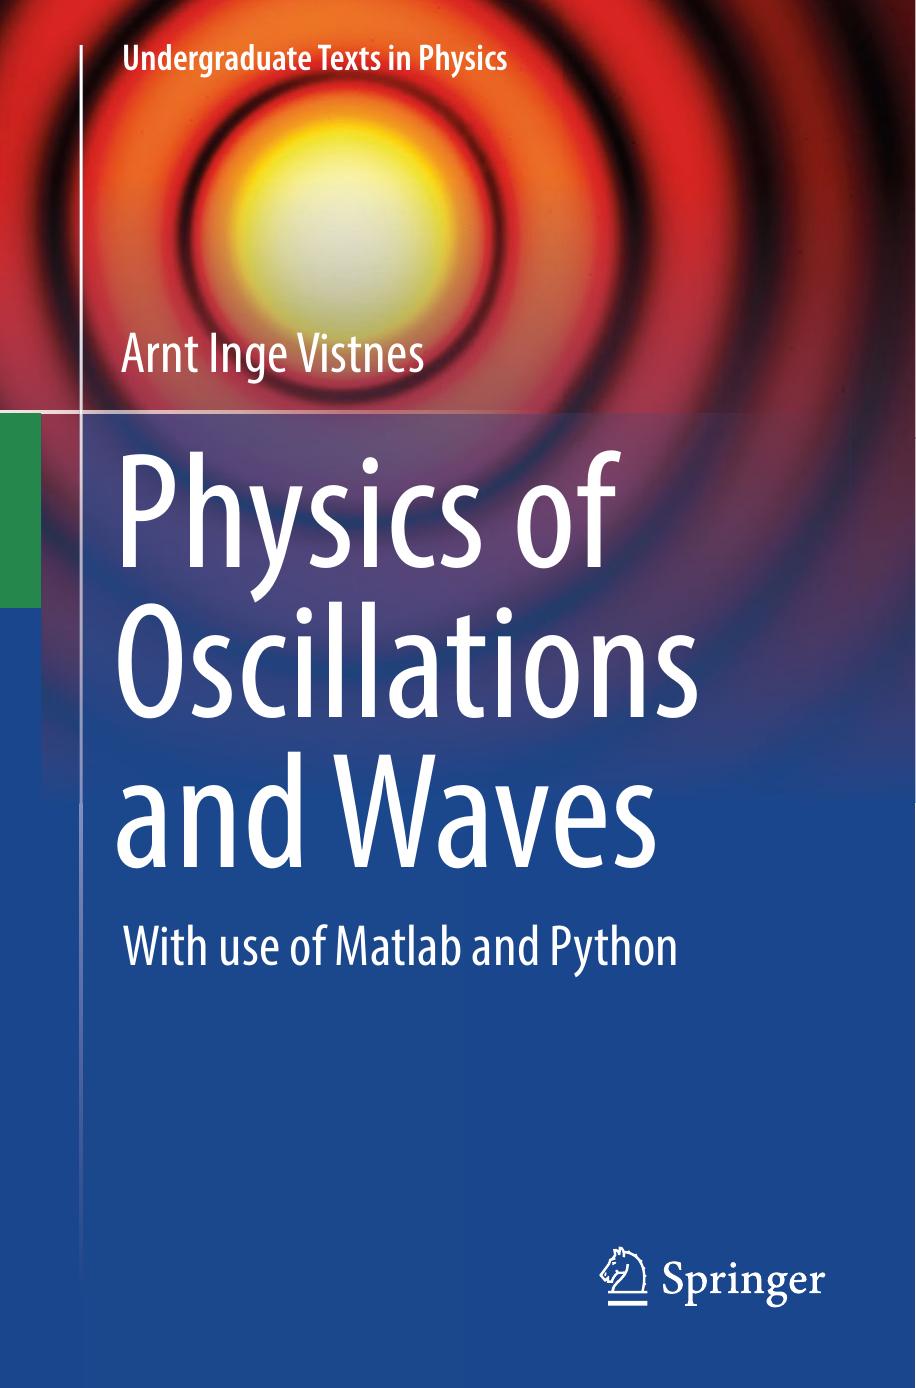 Physics of Oscillations and Waves by Arnt Inge Vistnes